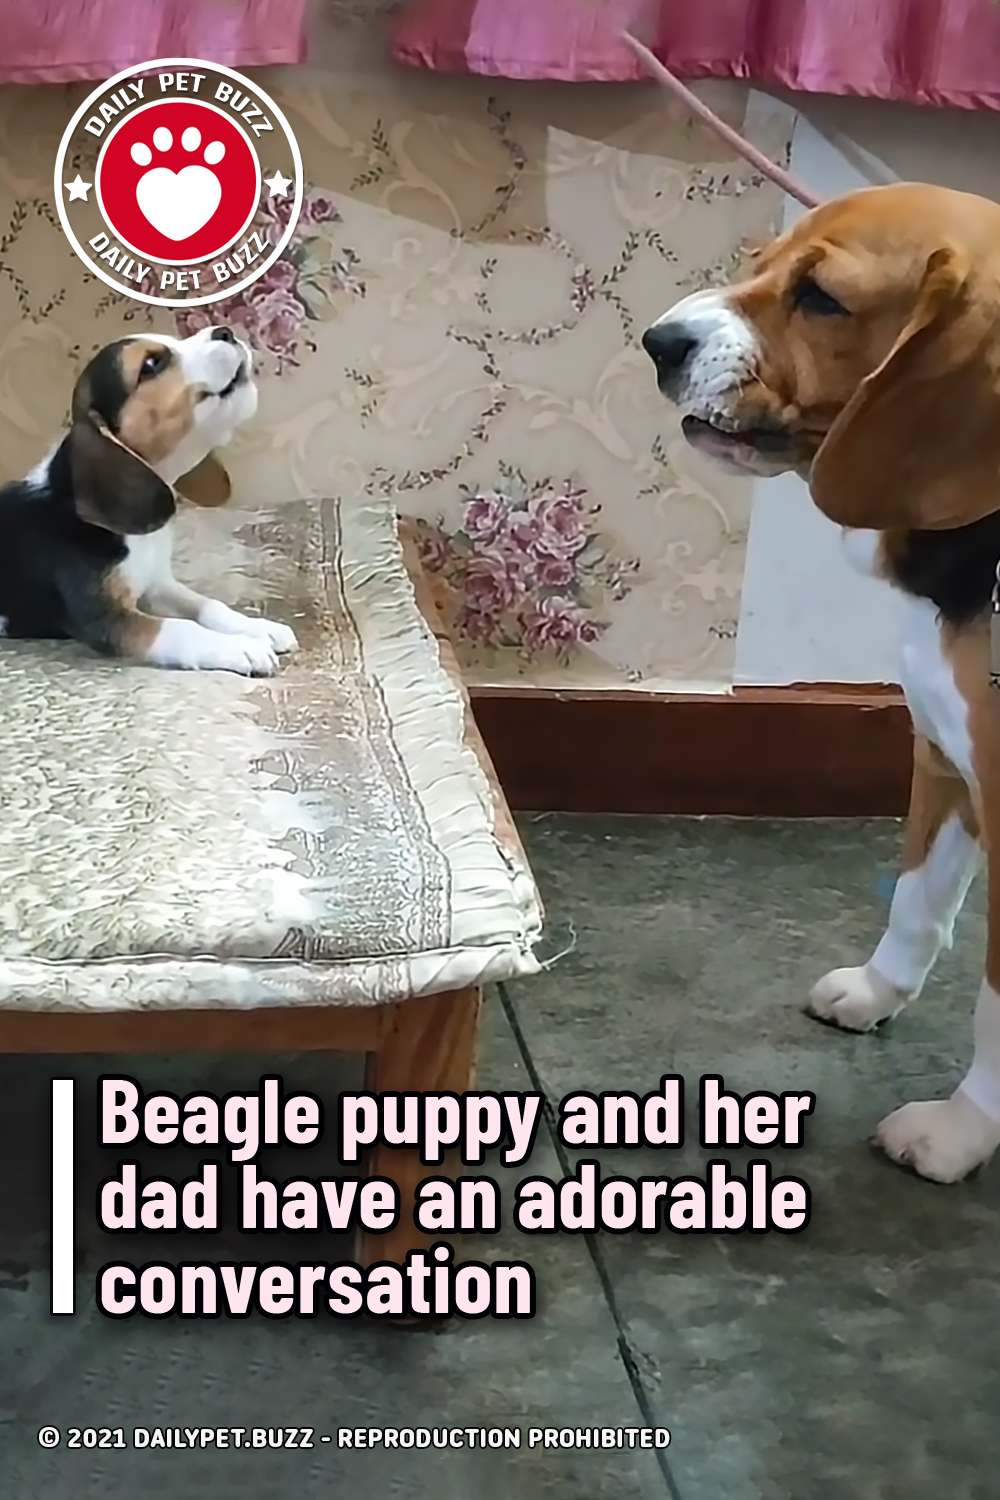 Beagle puppy and her dad have an adorable conversation